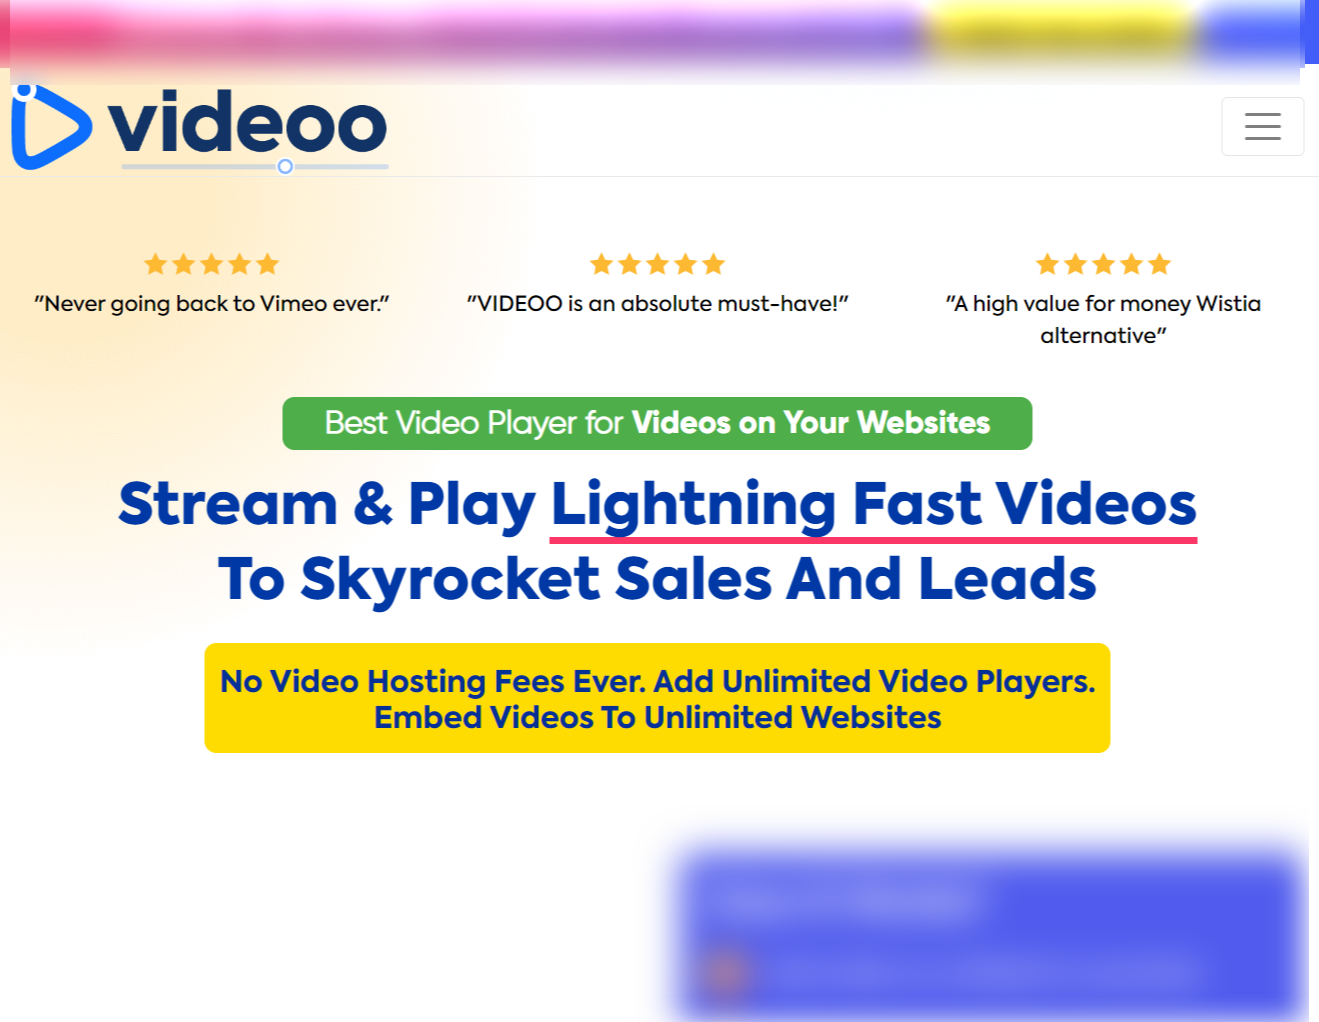 VIDEOO Stream Play Lightning Fast Videos VIDEOO review: Simple One Click Integration For Effortless Video Embedding. Seamlessly Add Videos Across Your Websites Without Hosting Them. Should You Buy VIDEOO? Find Out Here